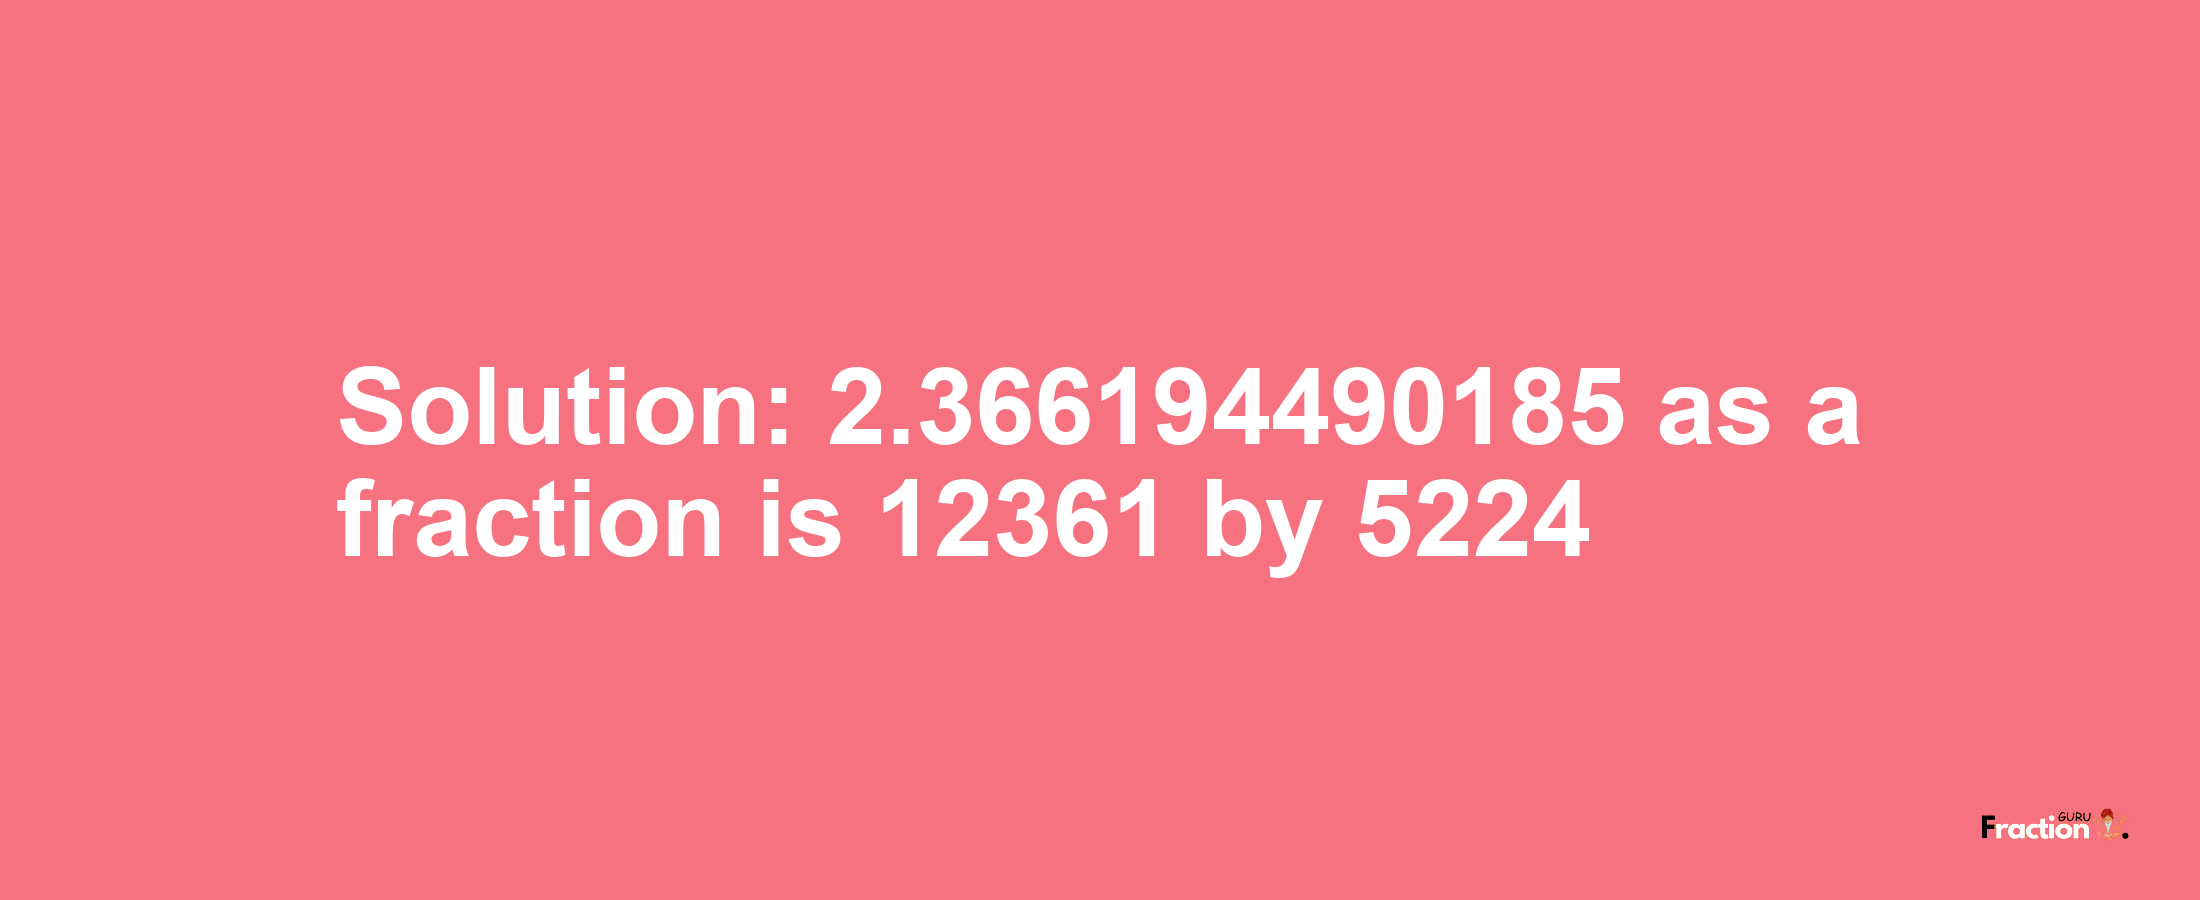 Solution:2.366194490185 as a fraction is 12361/5224